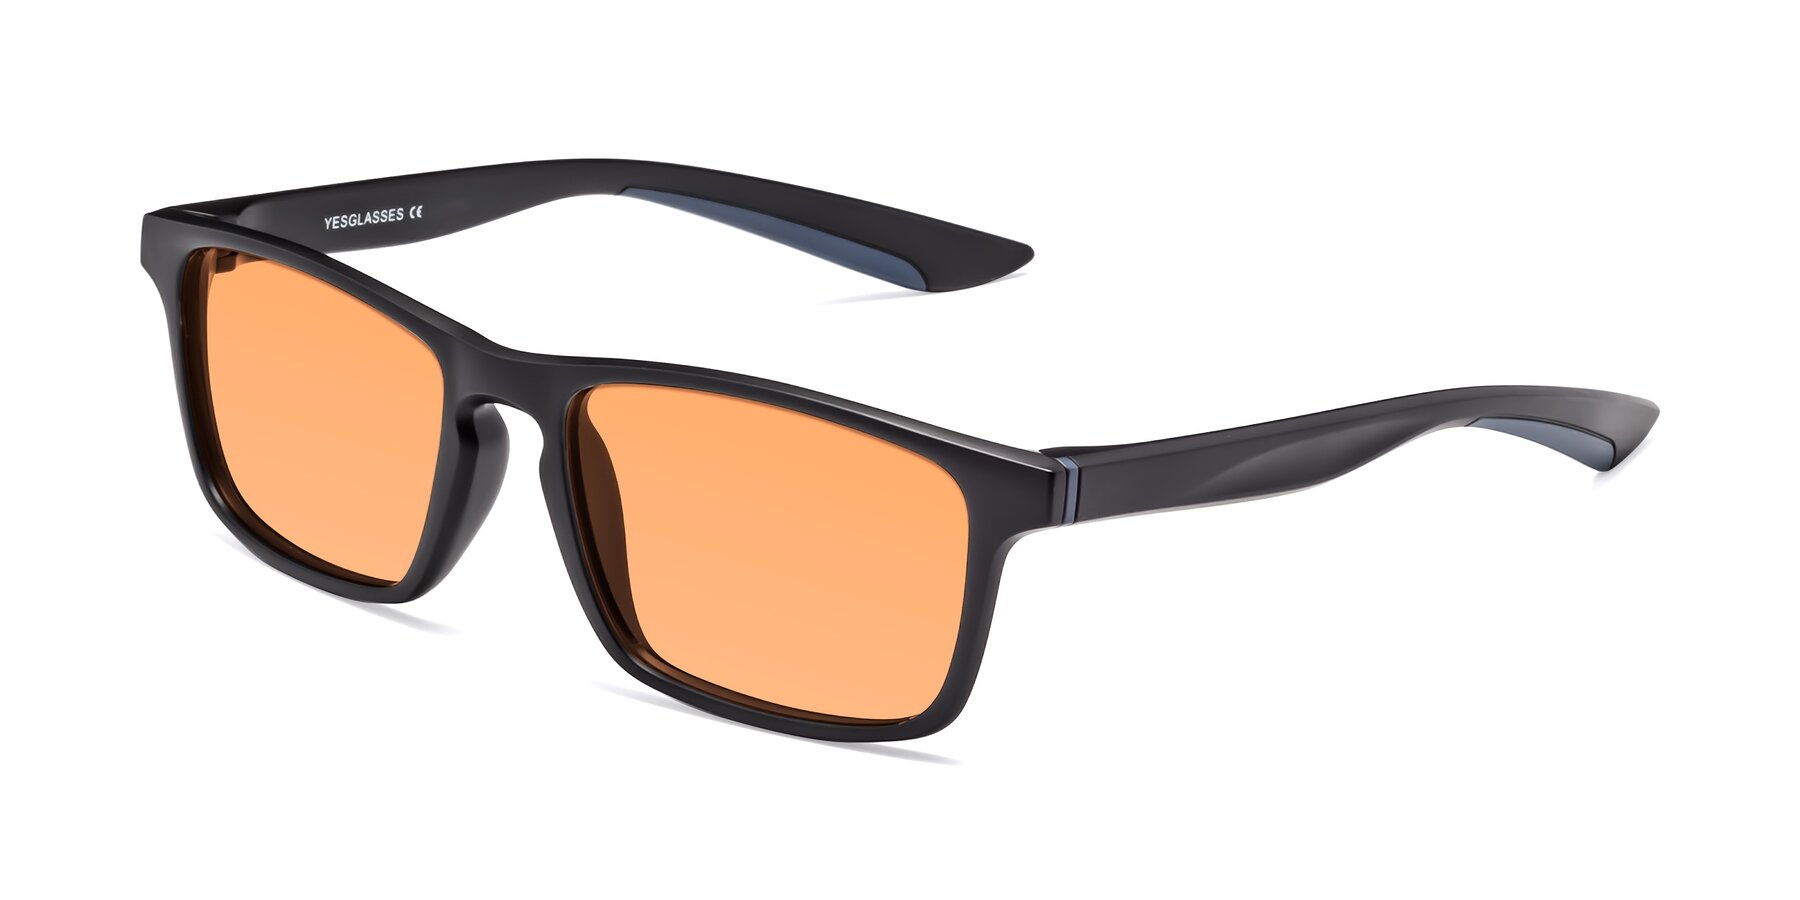 Angle of Passion in Matte Black-Blue with Medium Orange Tinted Lenses